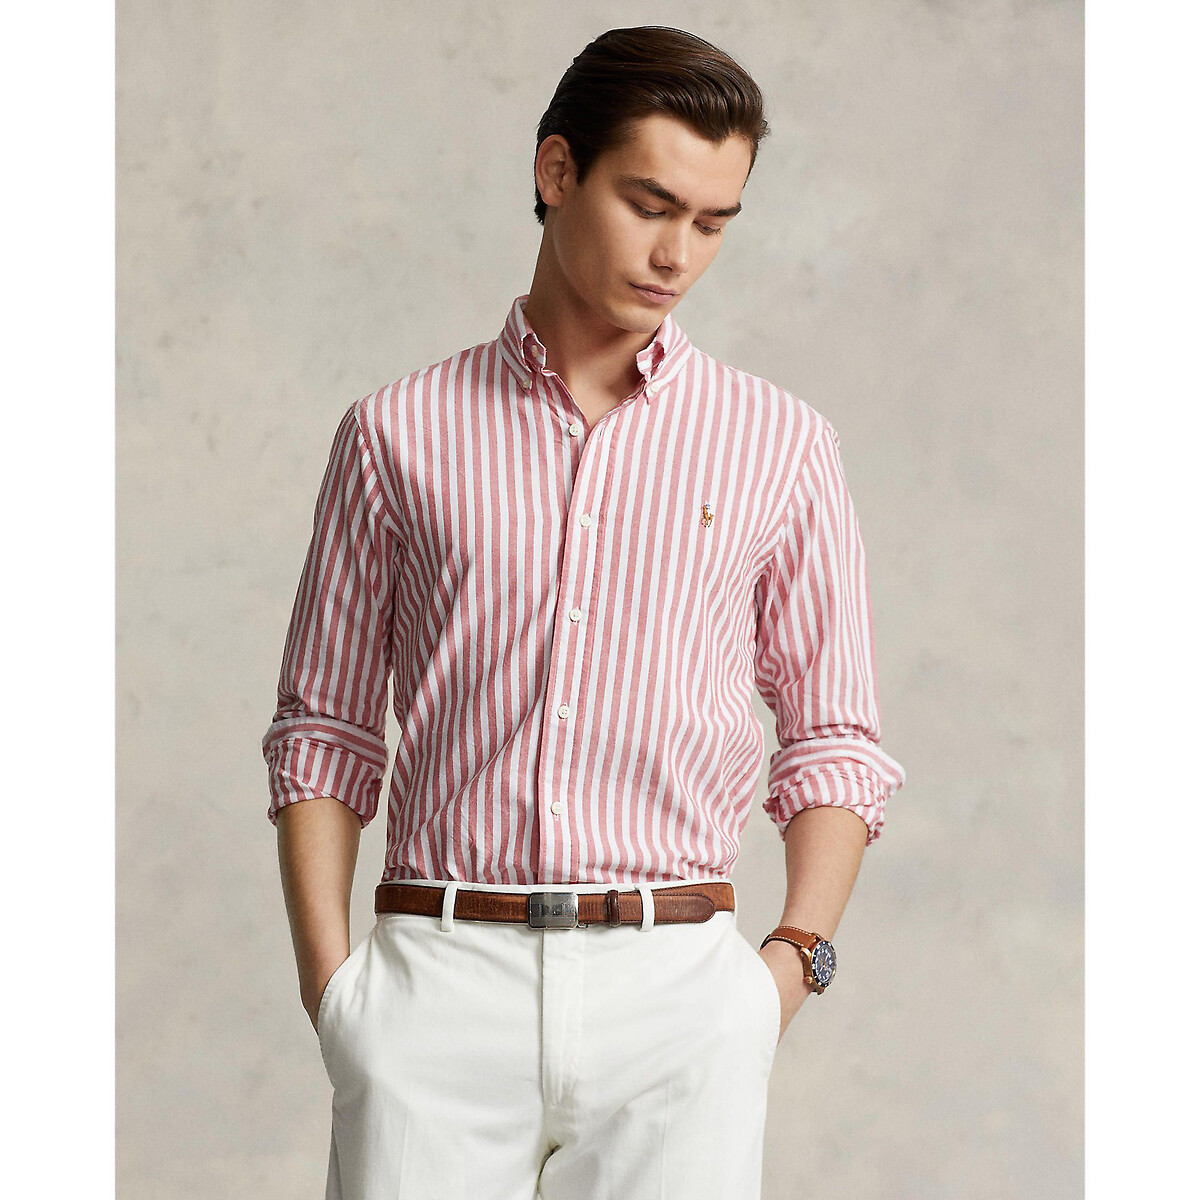 Image of Oxford Cotton Shirt in Slim Fit with Long Sleeves